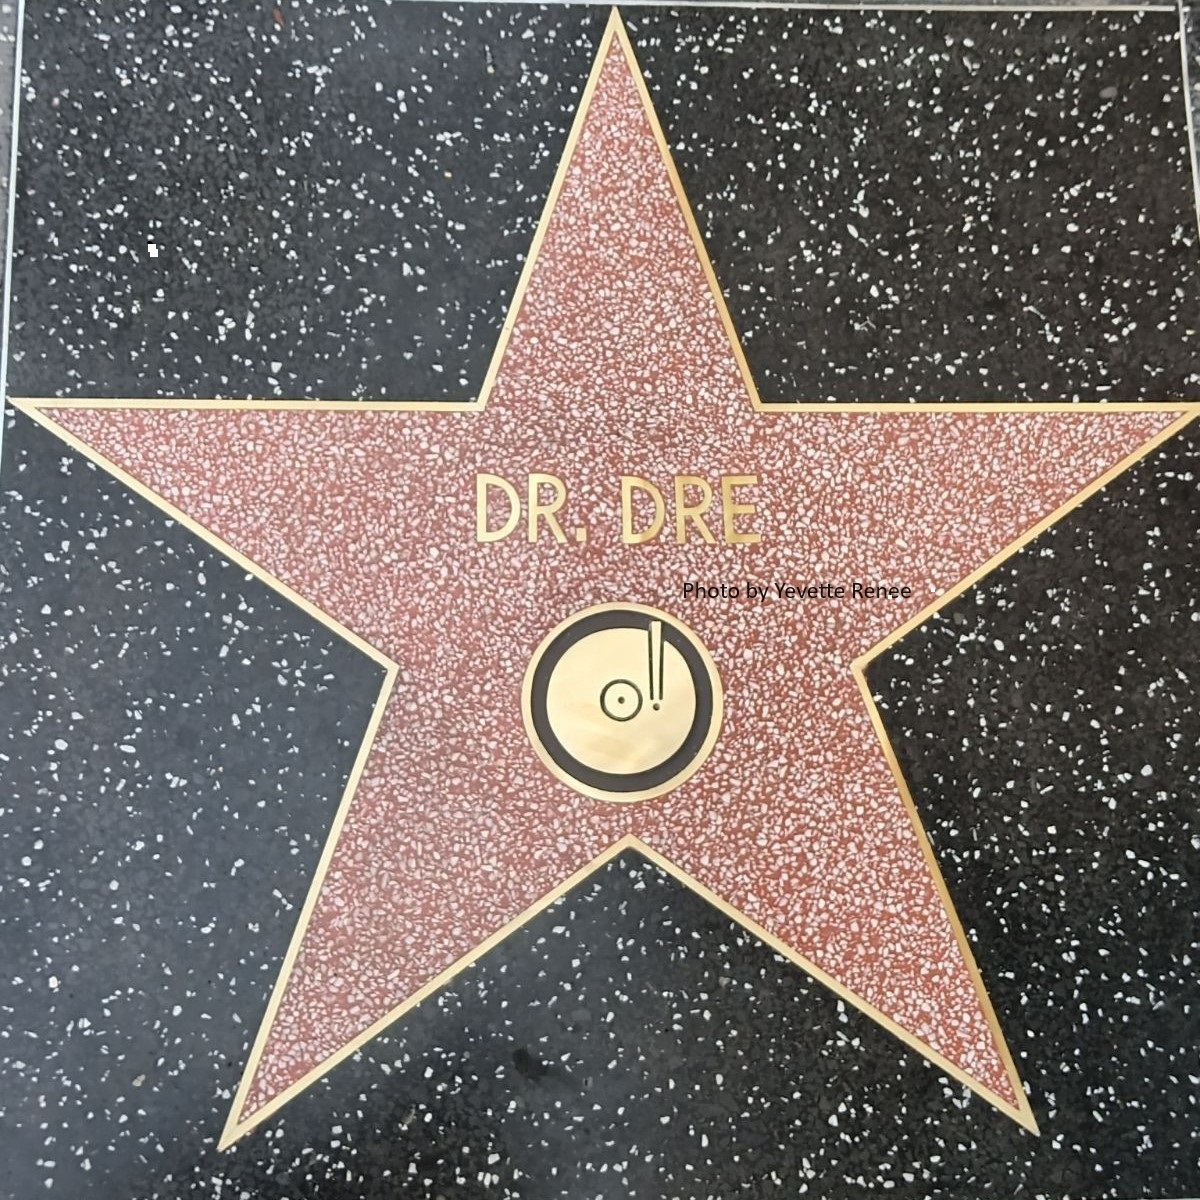 Dr. Dre's Star on the Hollywood Walk of Fame